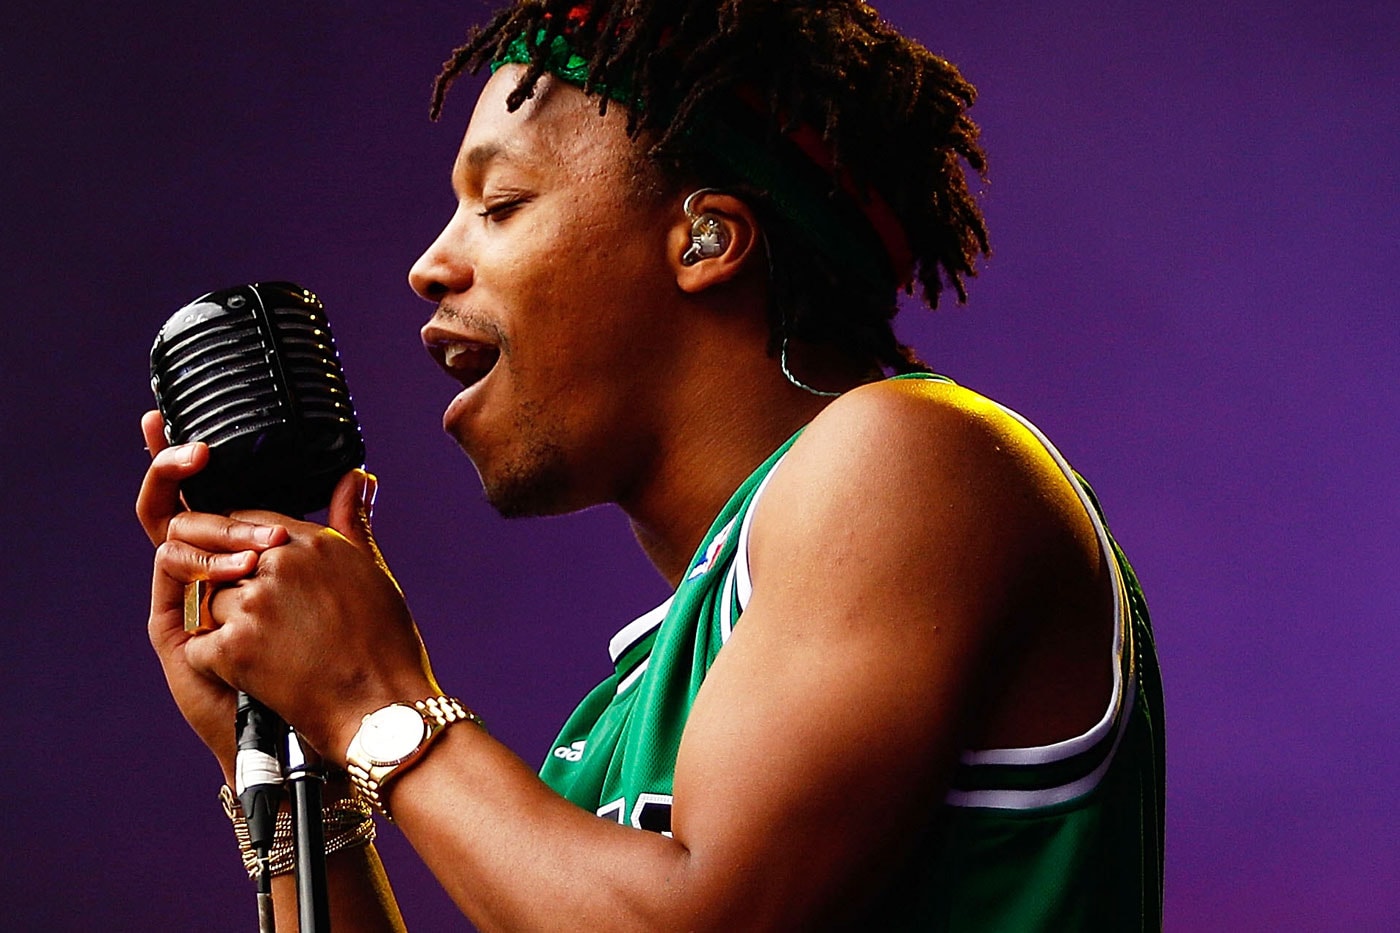 Lupe Fiasco and Google Executive Launched $1 Million Entrepreneur Search